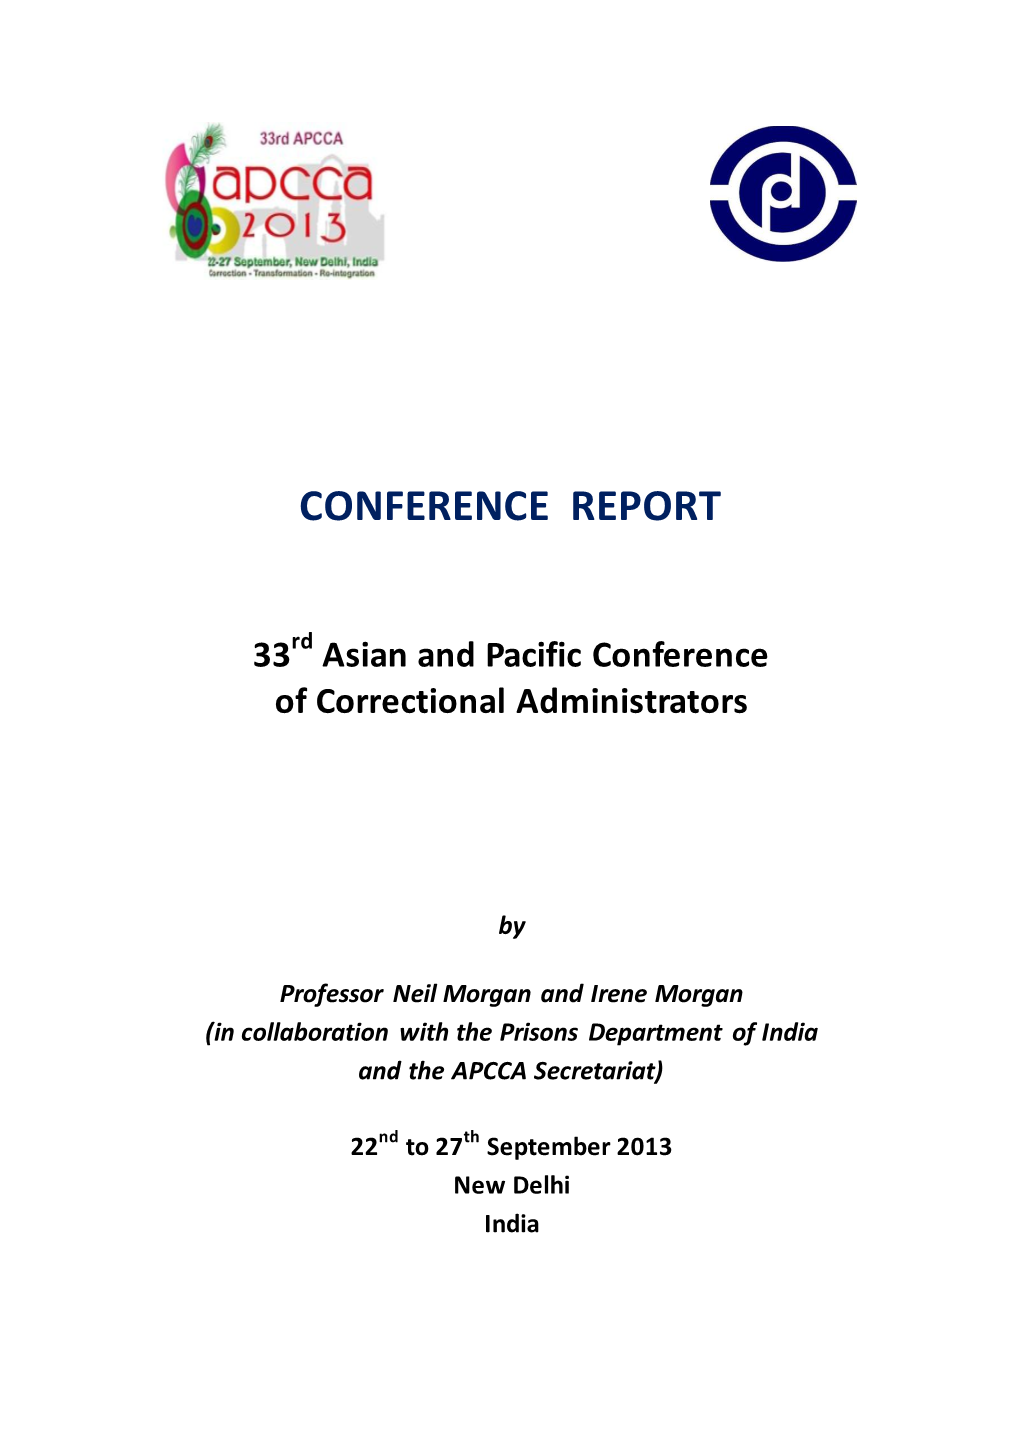 33Rd APCCA Conference Report 2013